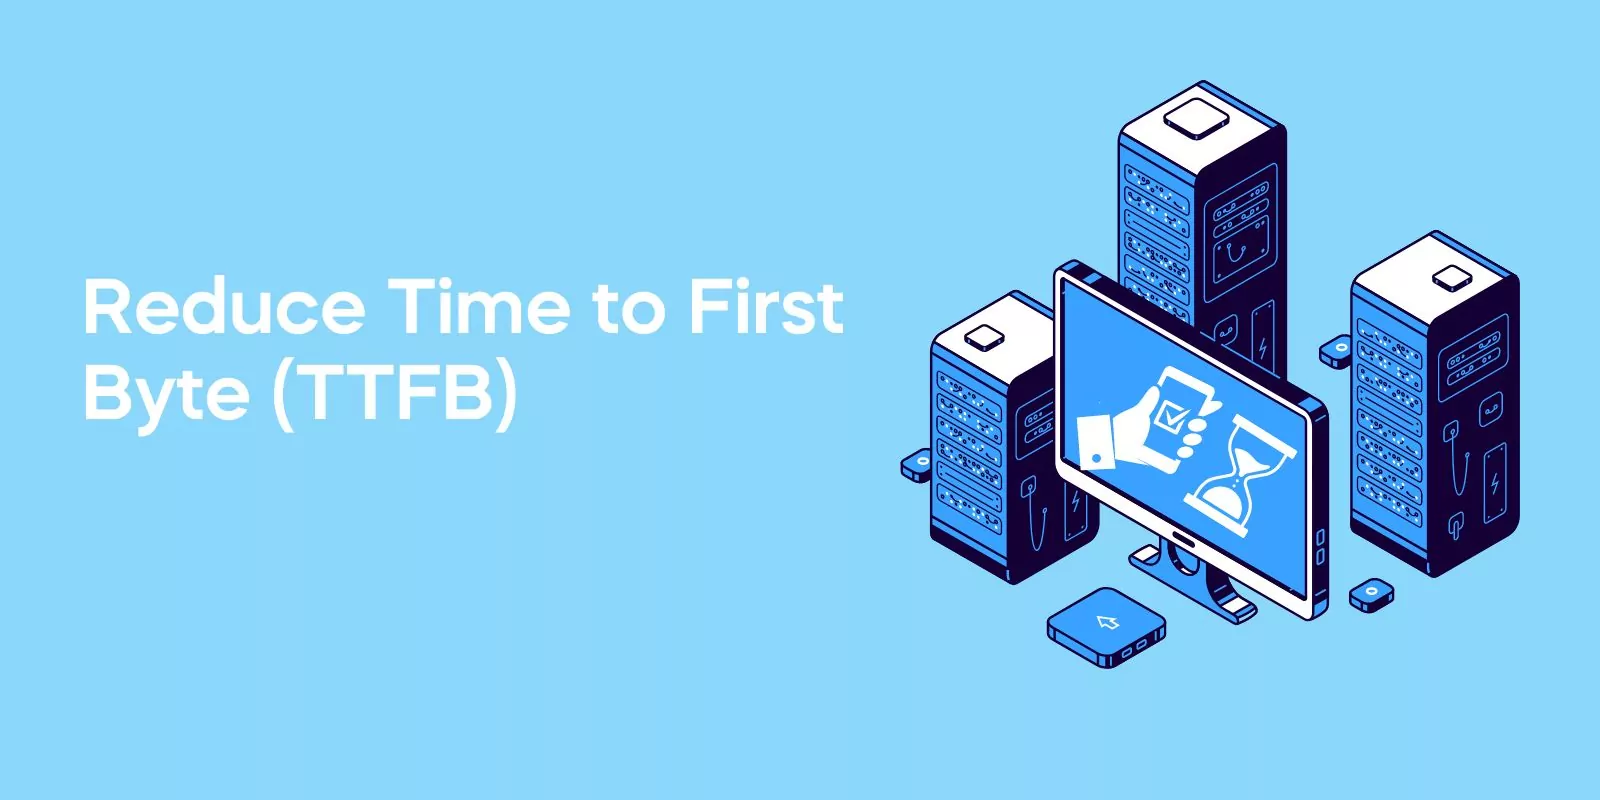 Reduce Time to First Byte (TTFB)